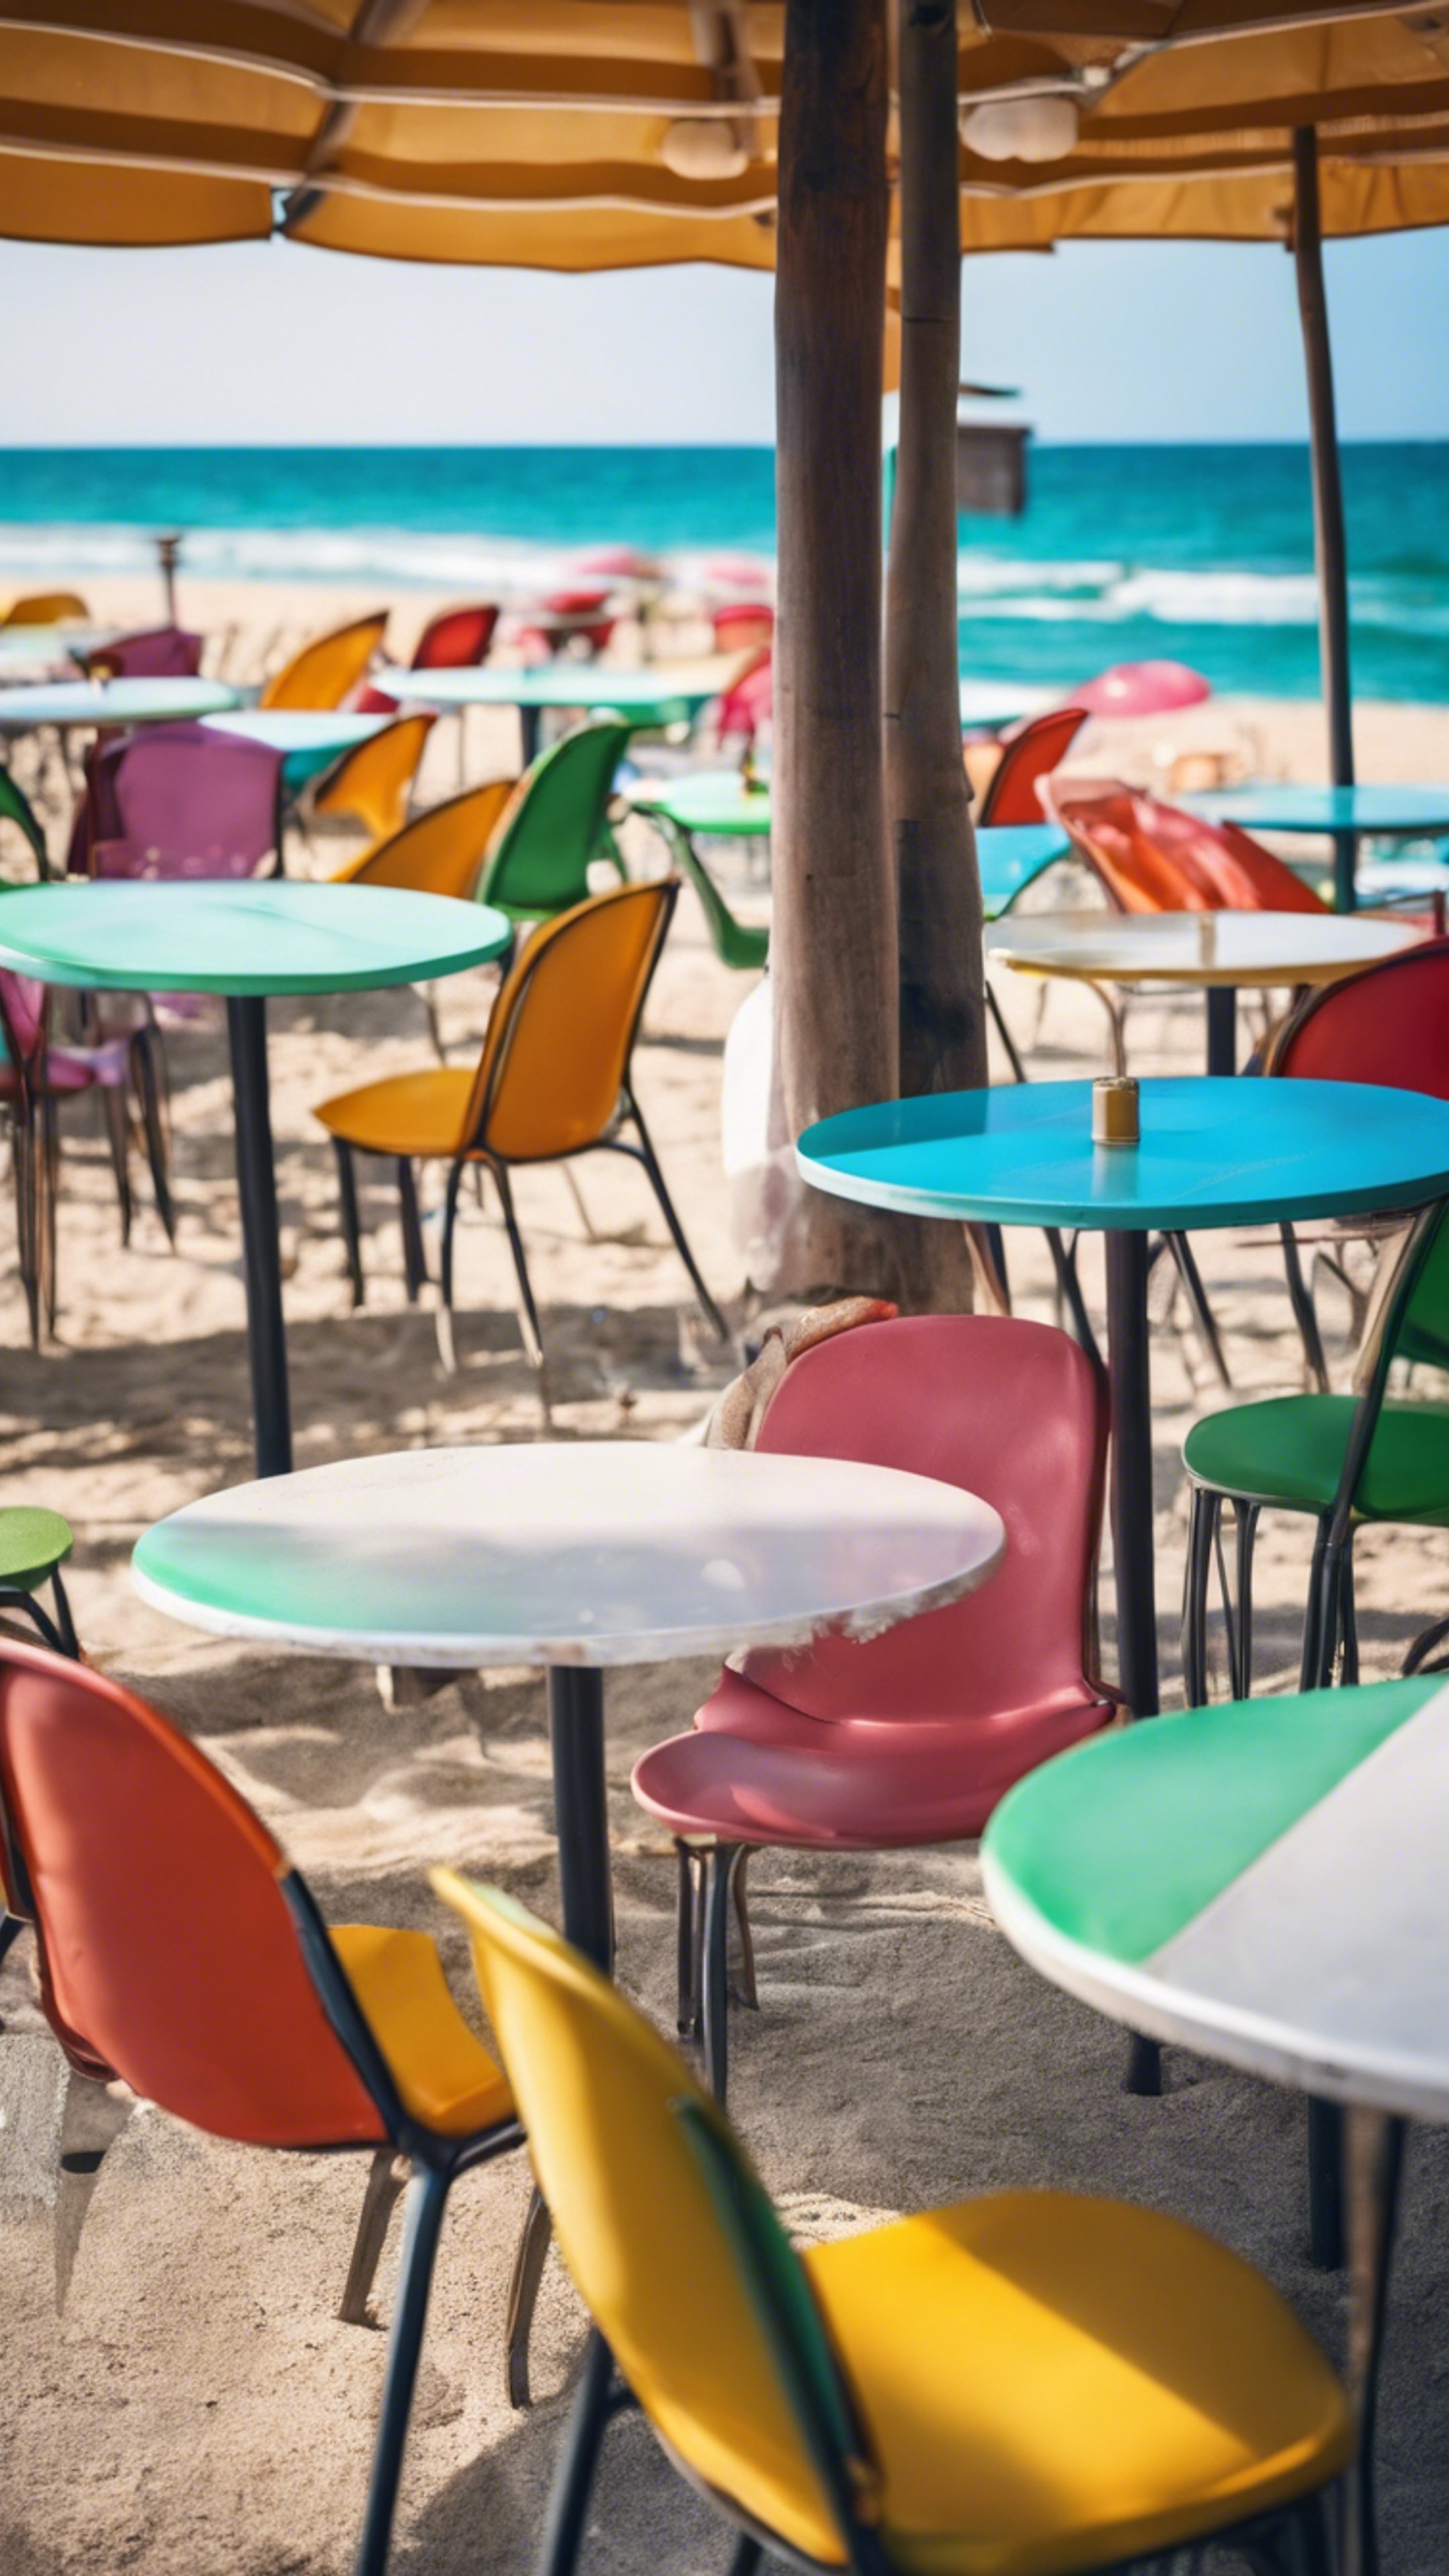 A beach side cafe with colorful chairs, umbrellas, and a panoramic view of the ocean. Шпалери[e8a344cbd52d49a3867e]